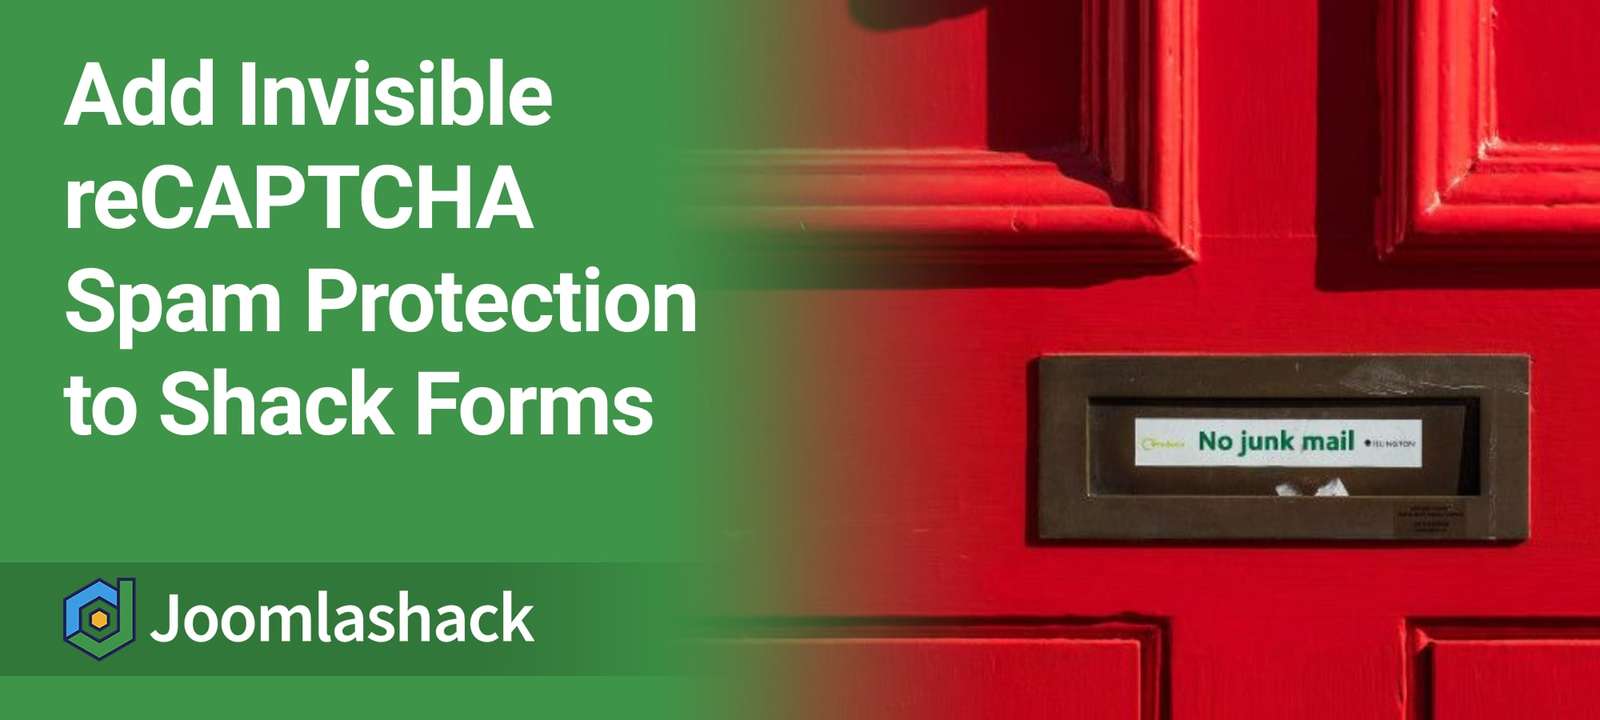 How to Add Invisible reCAPTCHA Spam Protection to Shack Forms (2)